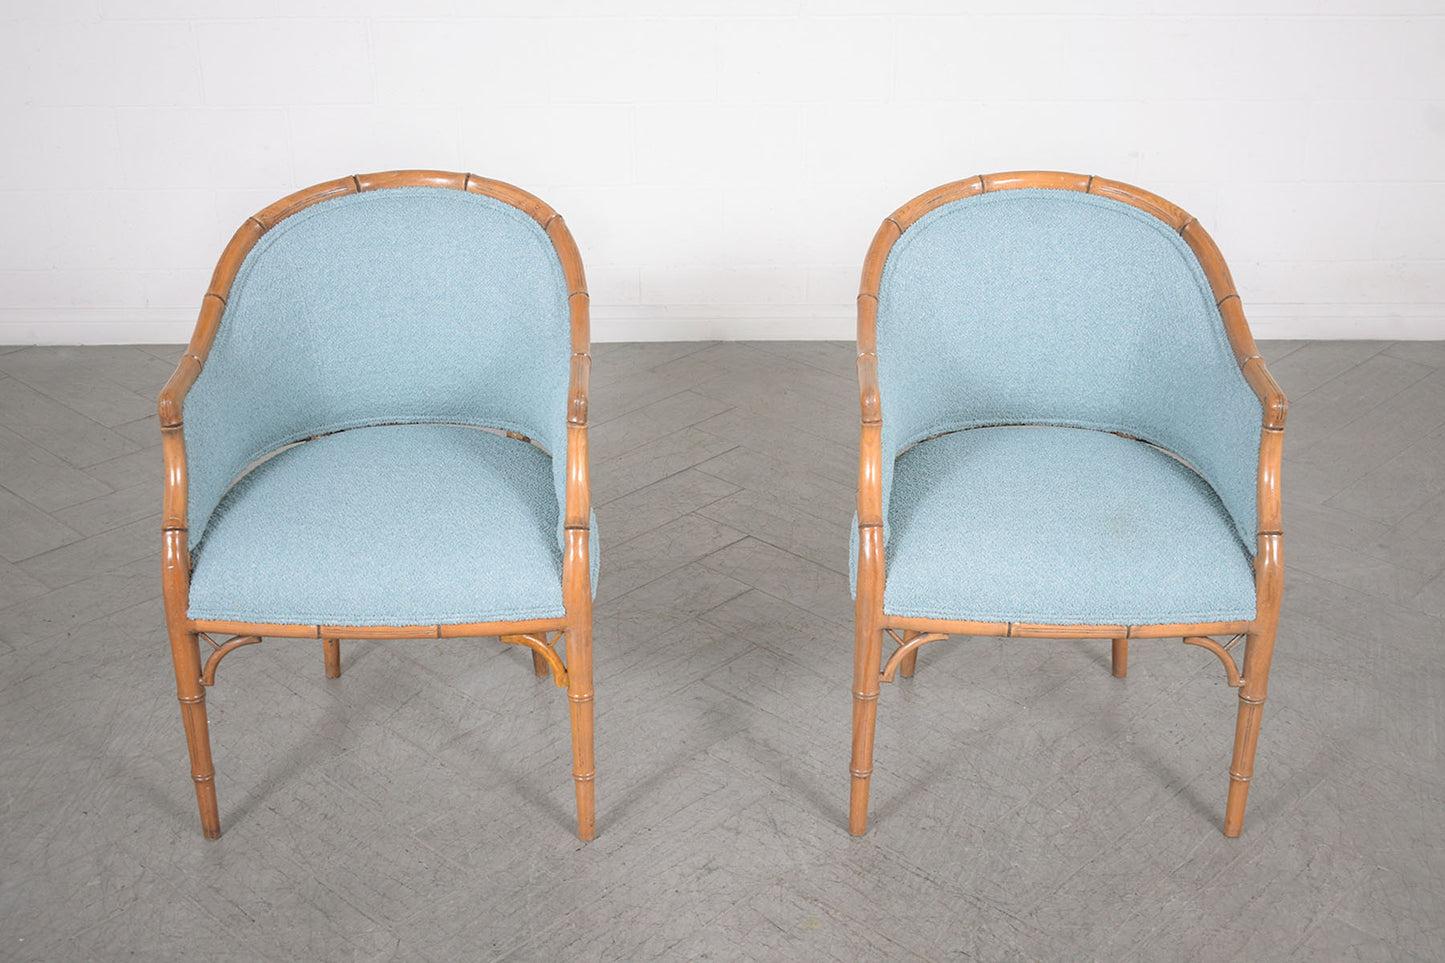 Pair of Faux Bamboo Armchairs - Blue Fabric